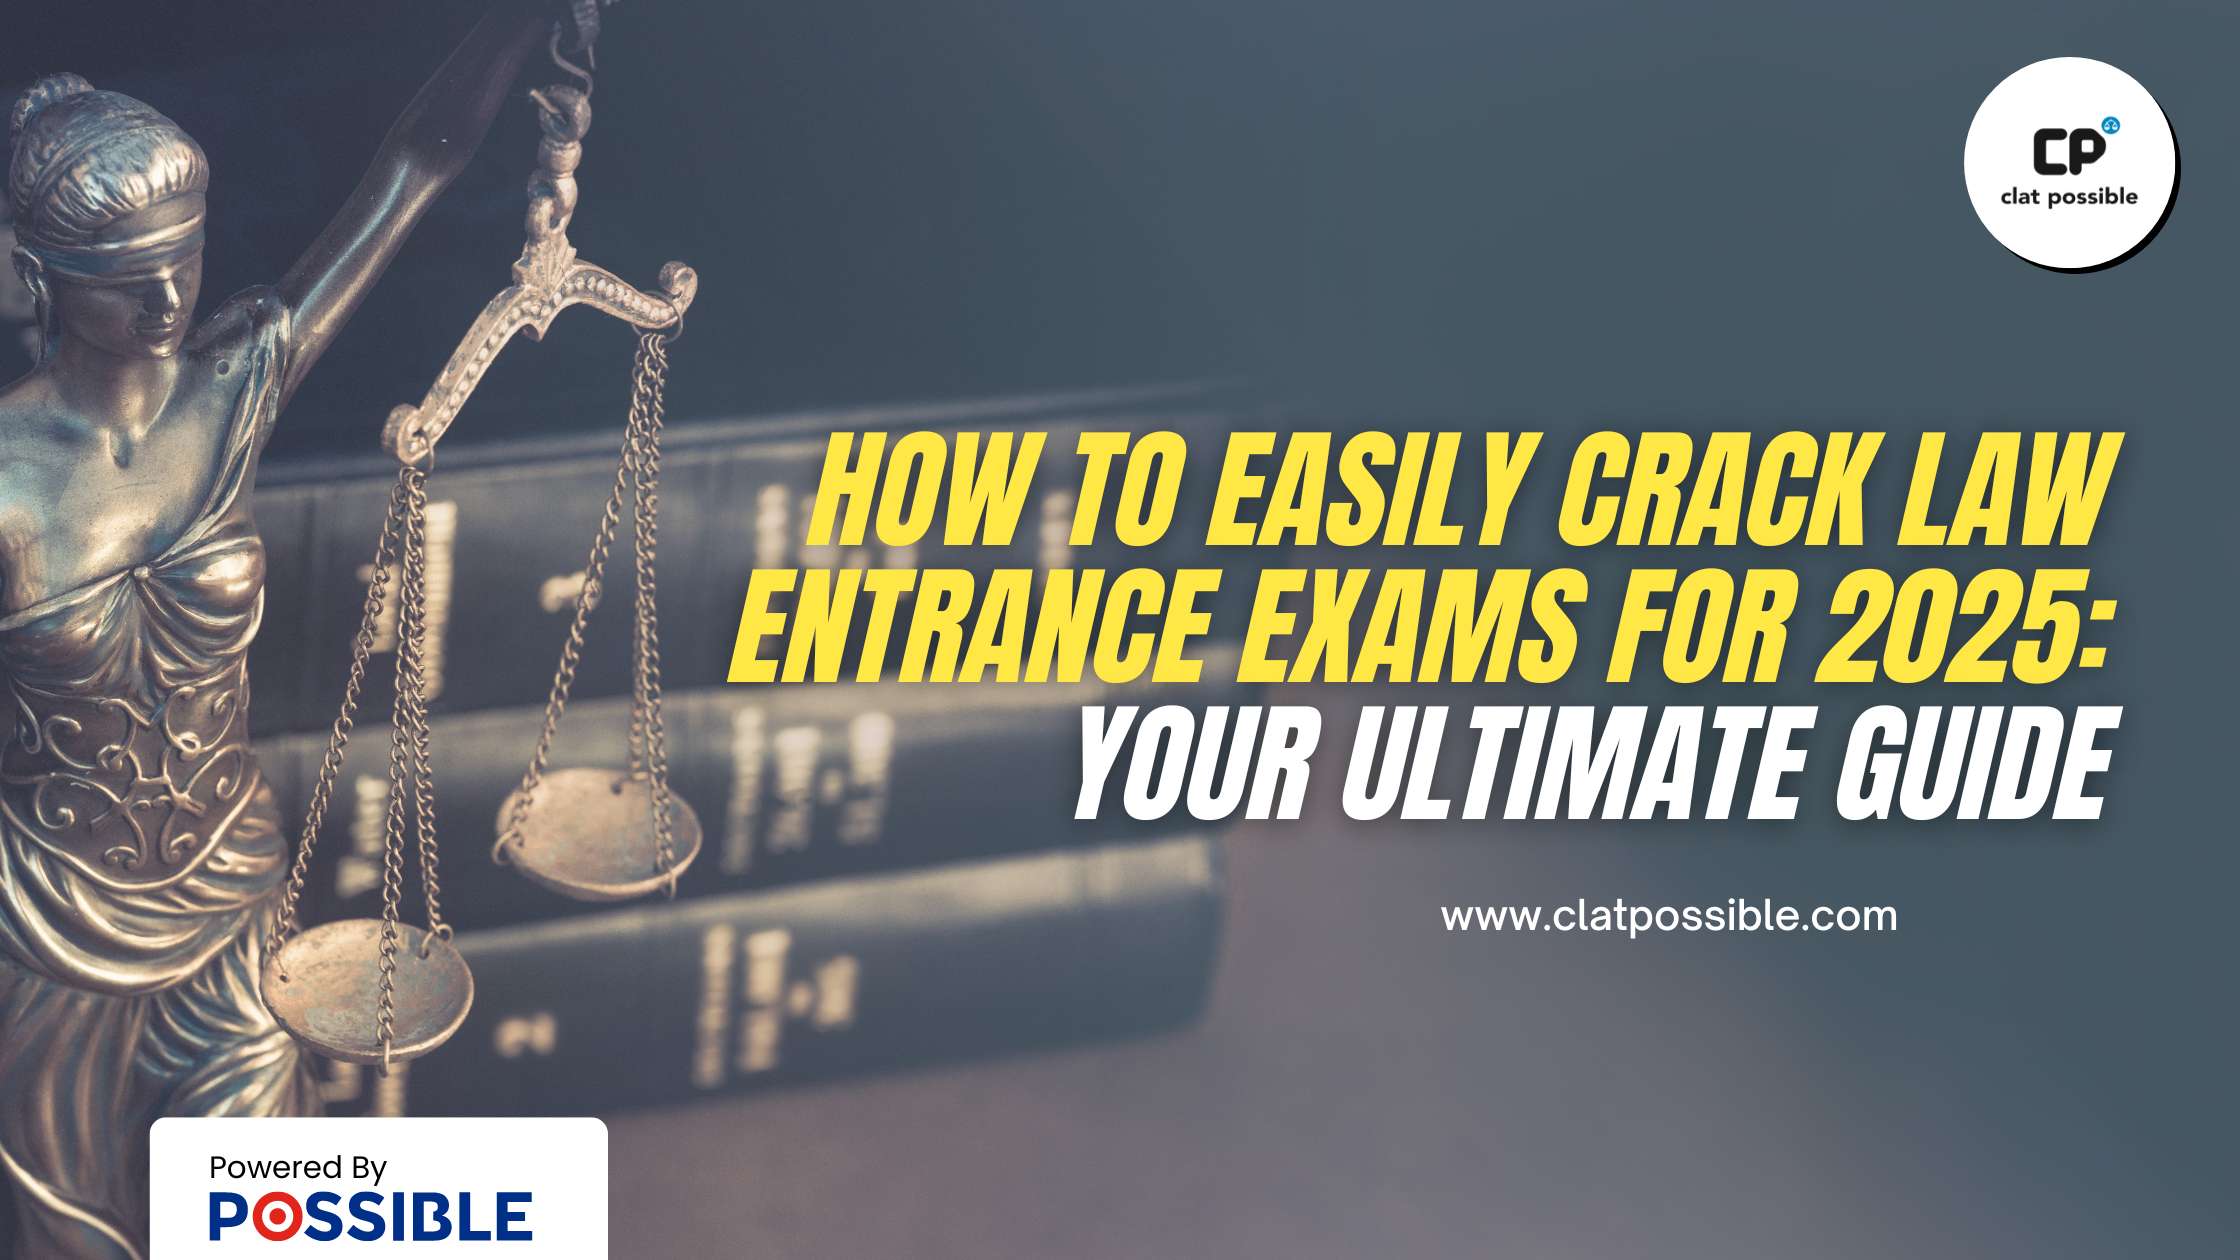 How to Easily Crack Law Entrance Exams for 2025: Your Ultimate Guide